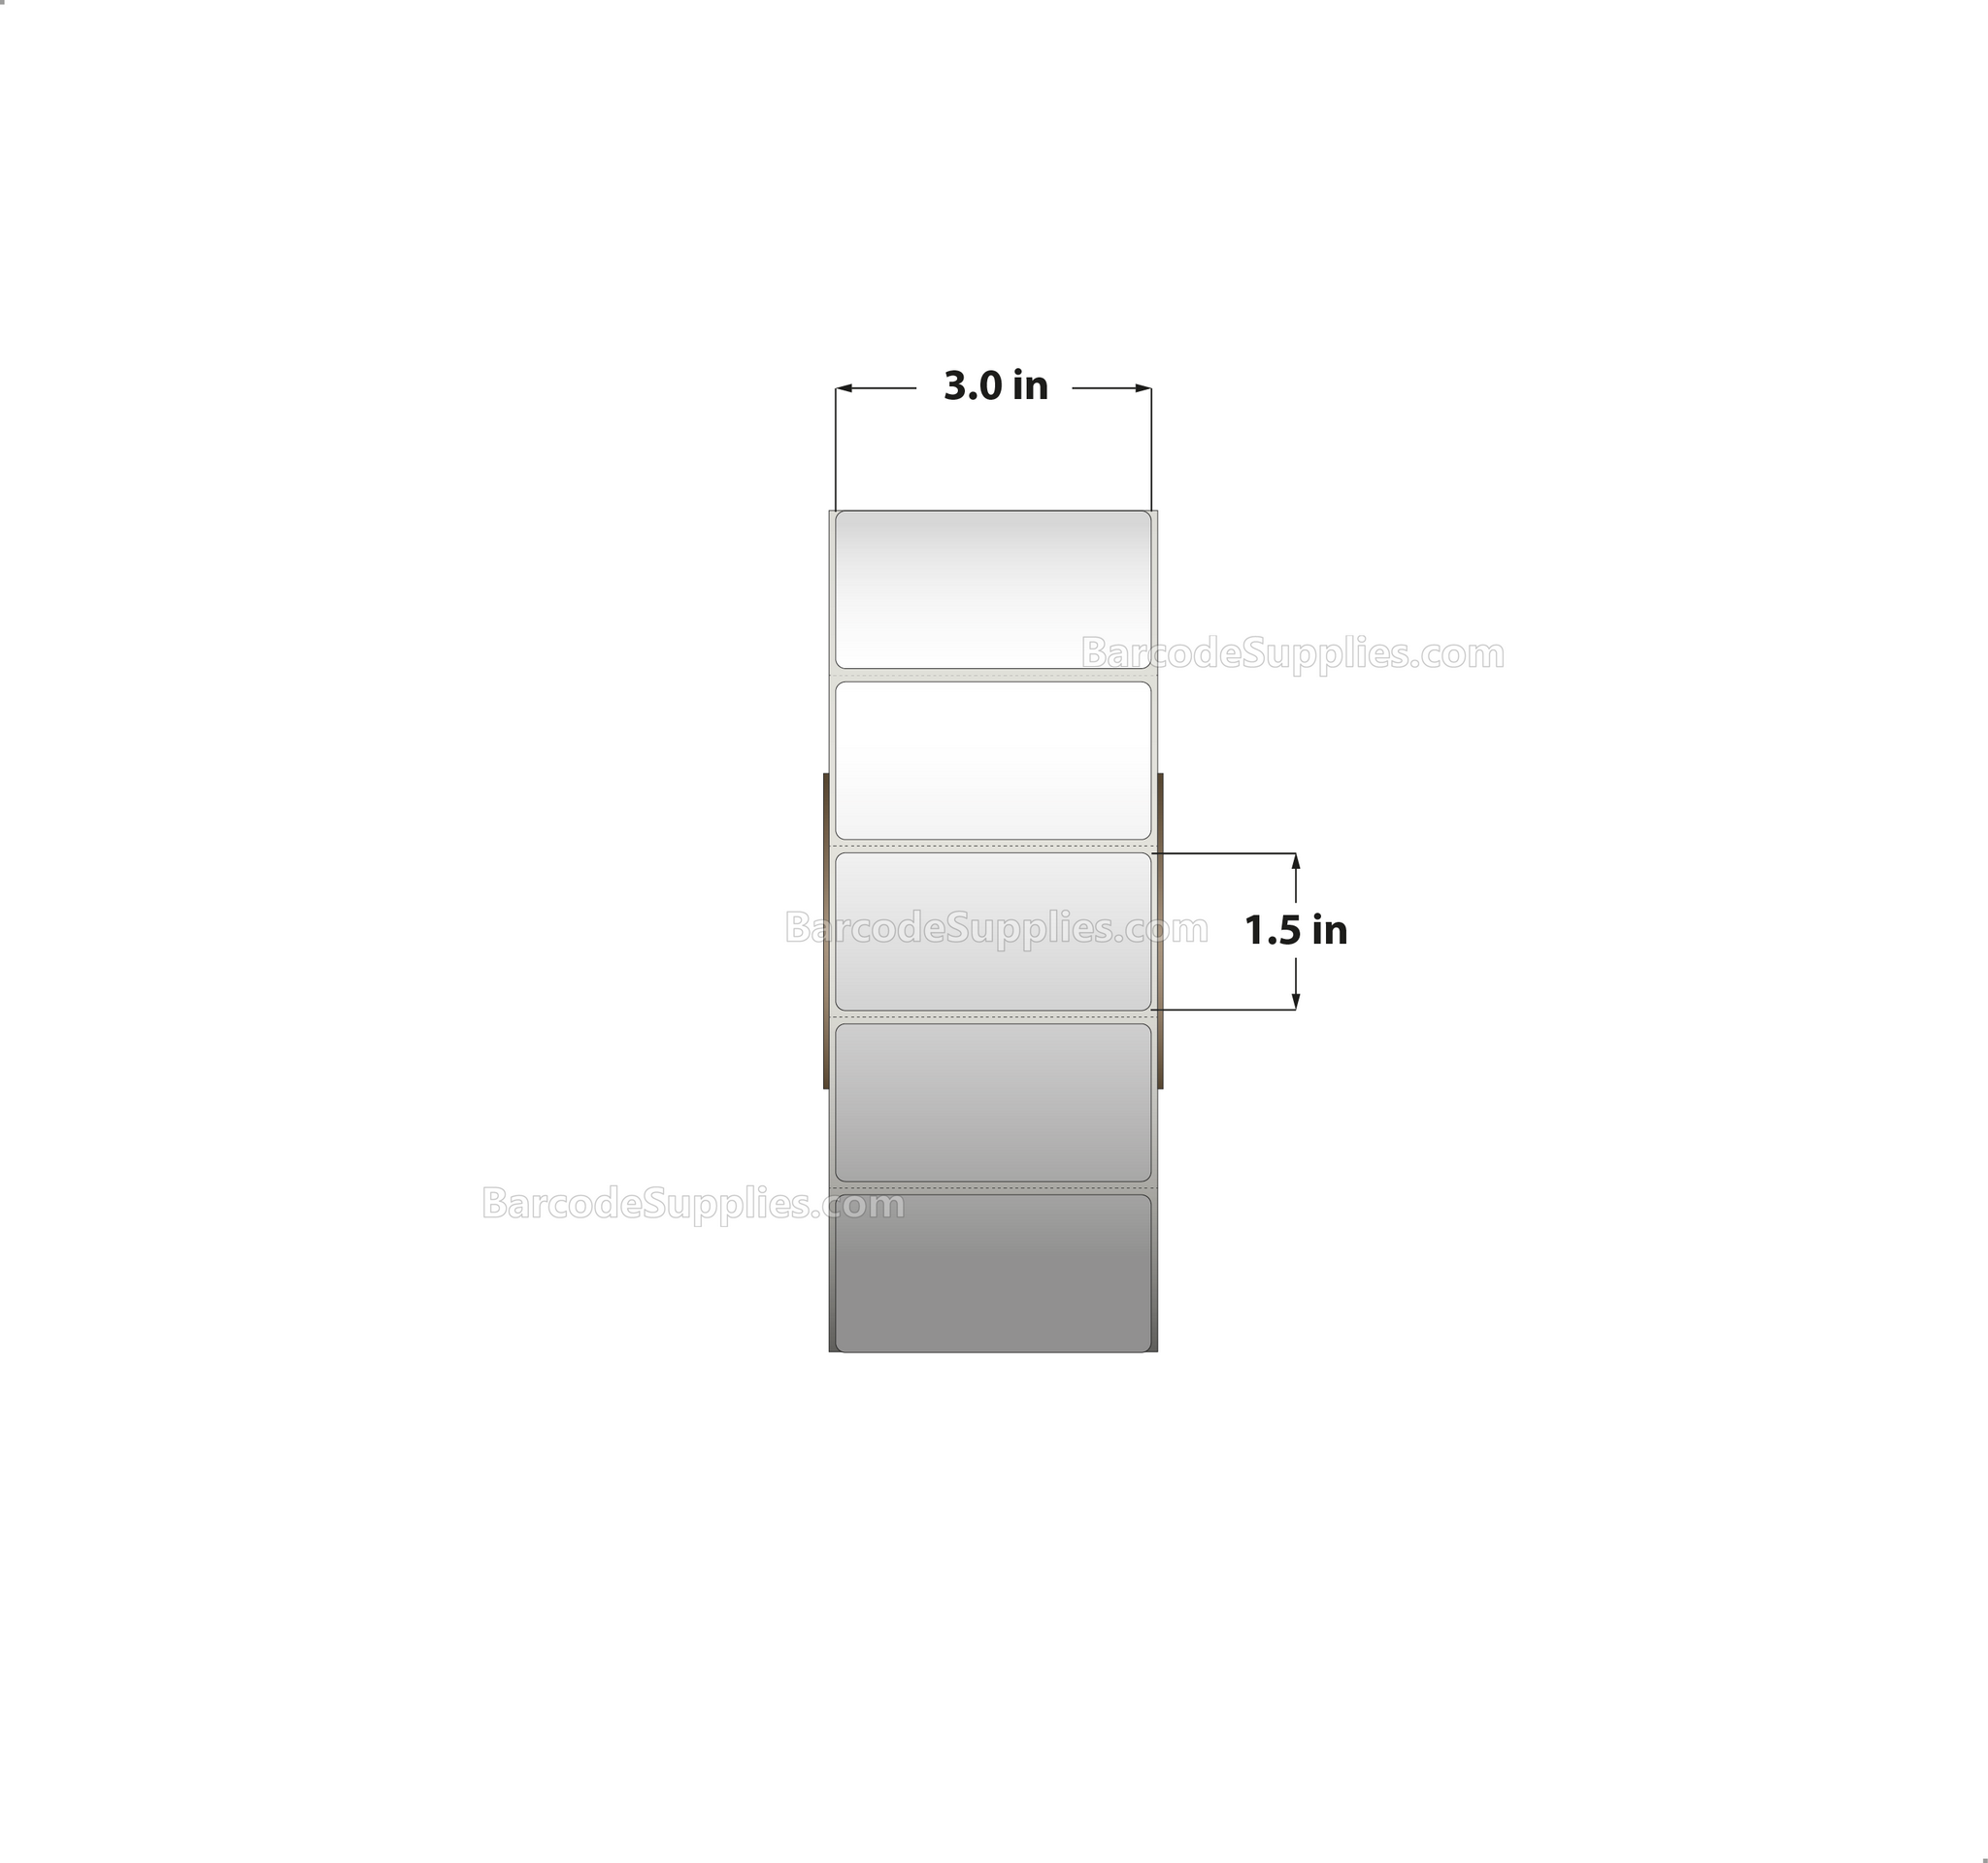 3 x 1.5 Thermal Transfer White Labels With Permanent Adhesive - Perforated - 3600 Labels Per Roll - Carton Of 8 Rolls - 28800 Labels Total - MPN: RT-3-15-3600-3